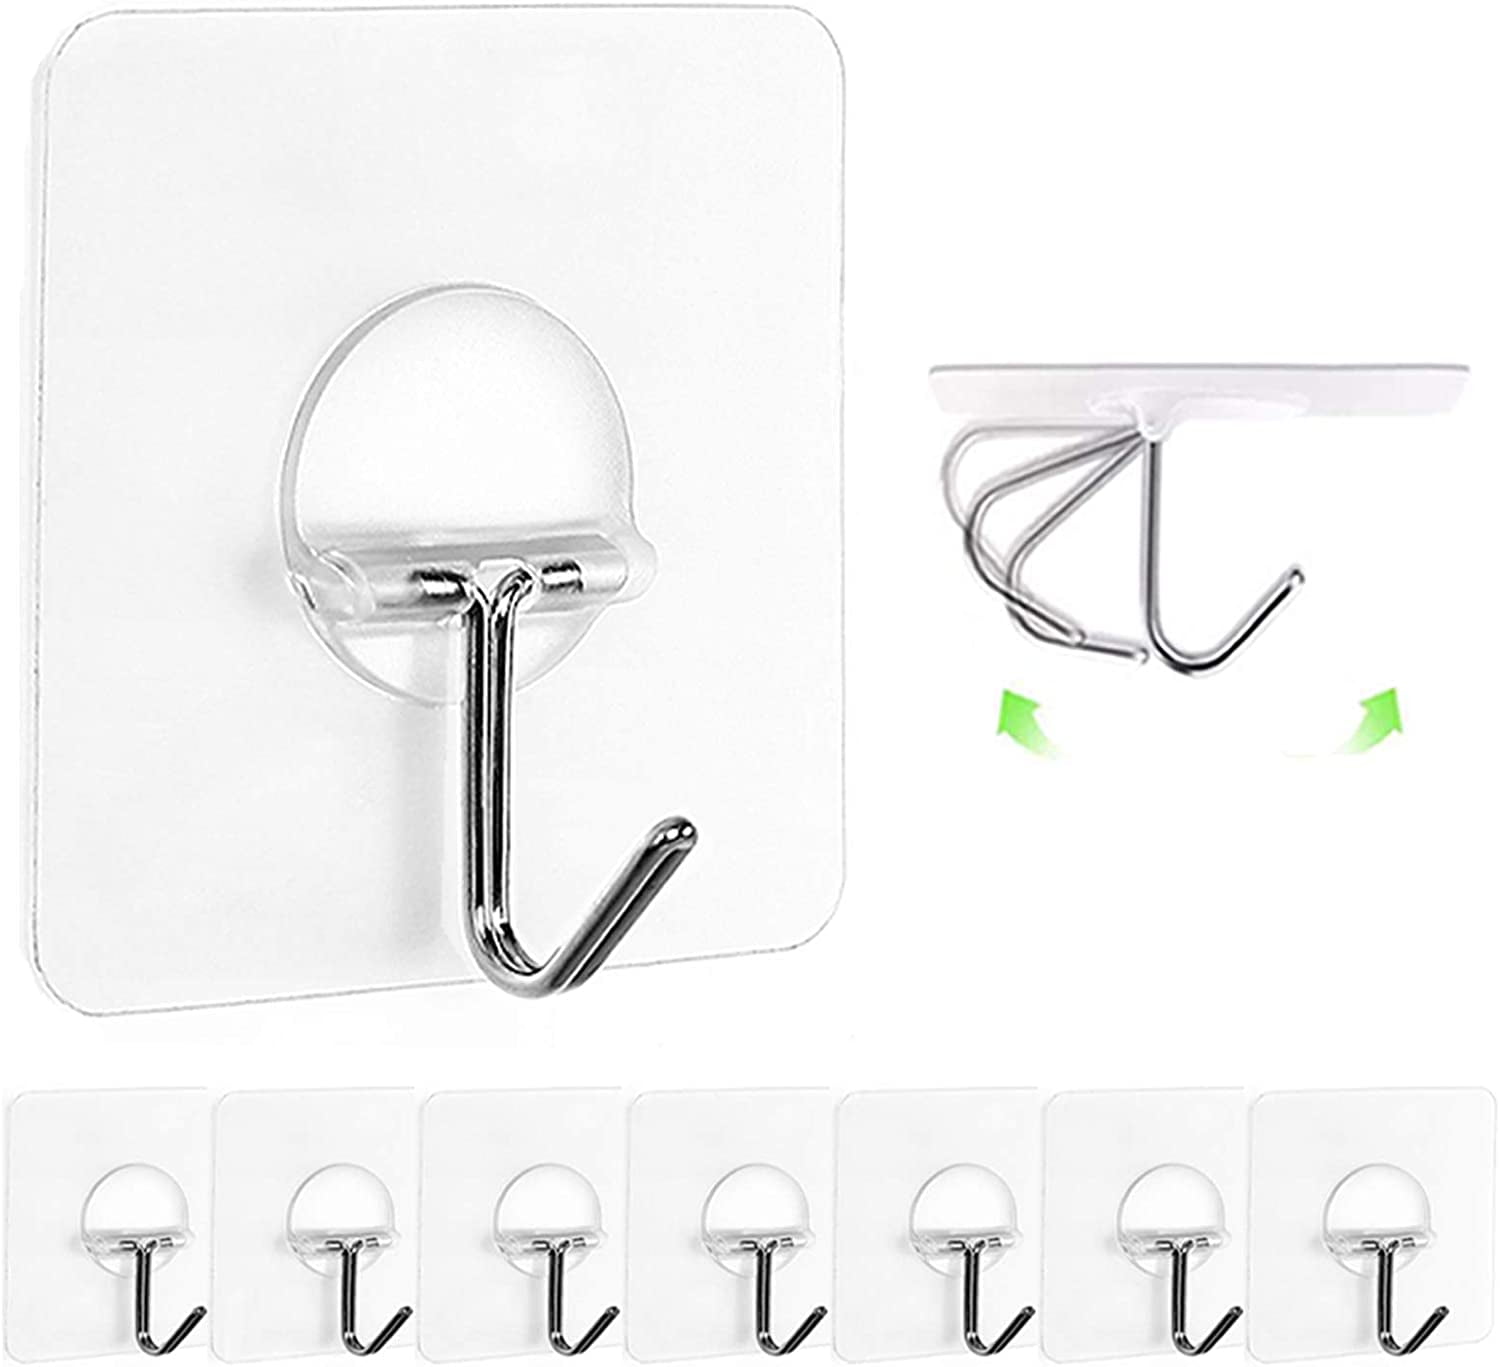 20 PCS Heavy Duty Self Adhesive Hooks with Stainless Hooks Reusable for Kitchens Bathroom Adhesive Hooks Kitchen Wall Hooks Office